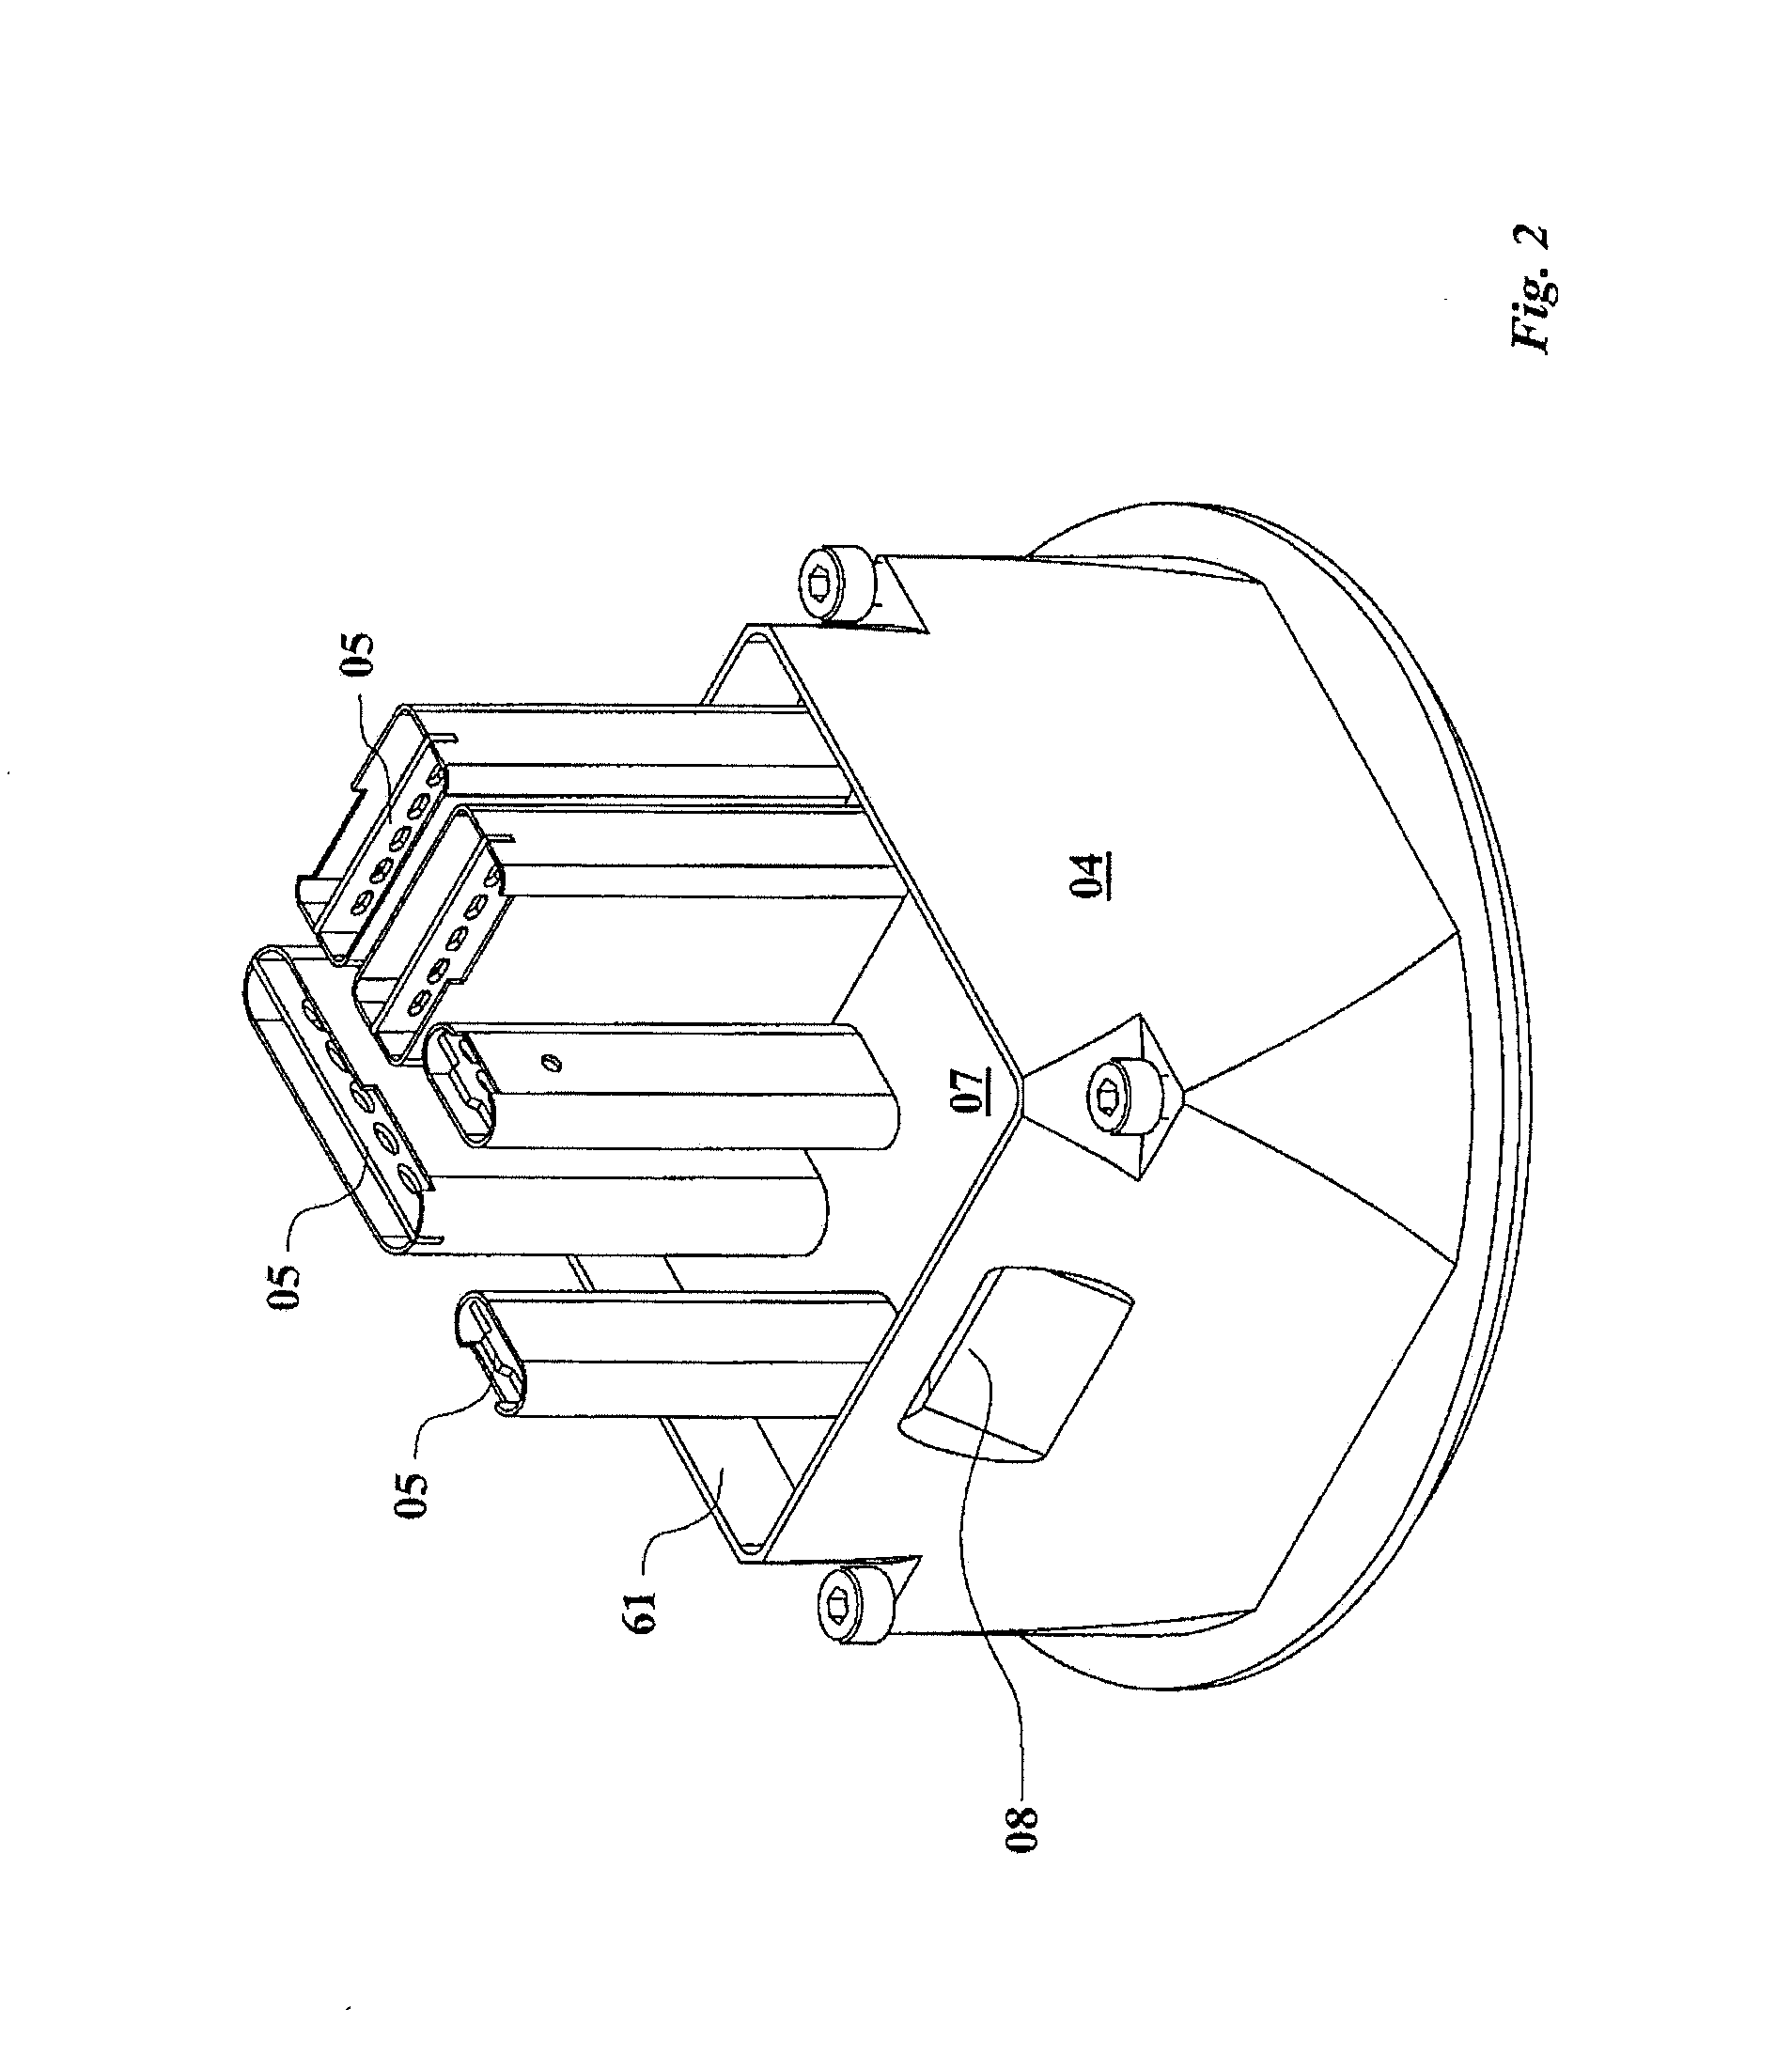 Device For Soldering Electrical Or Electronic Components